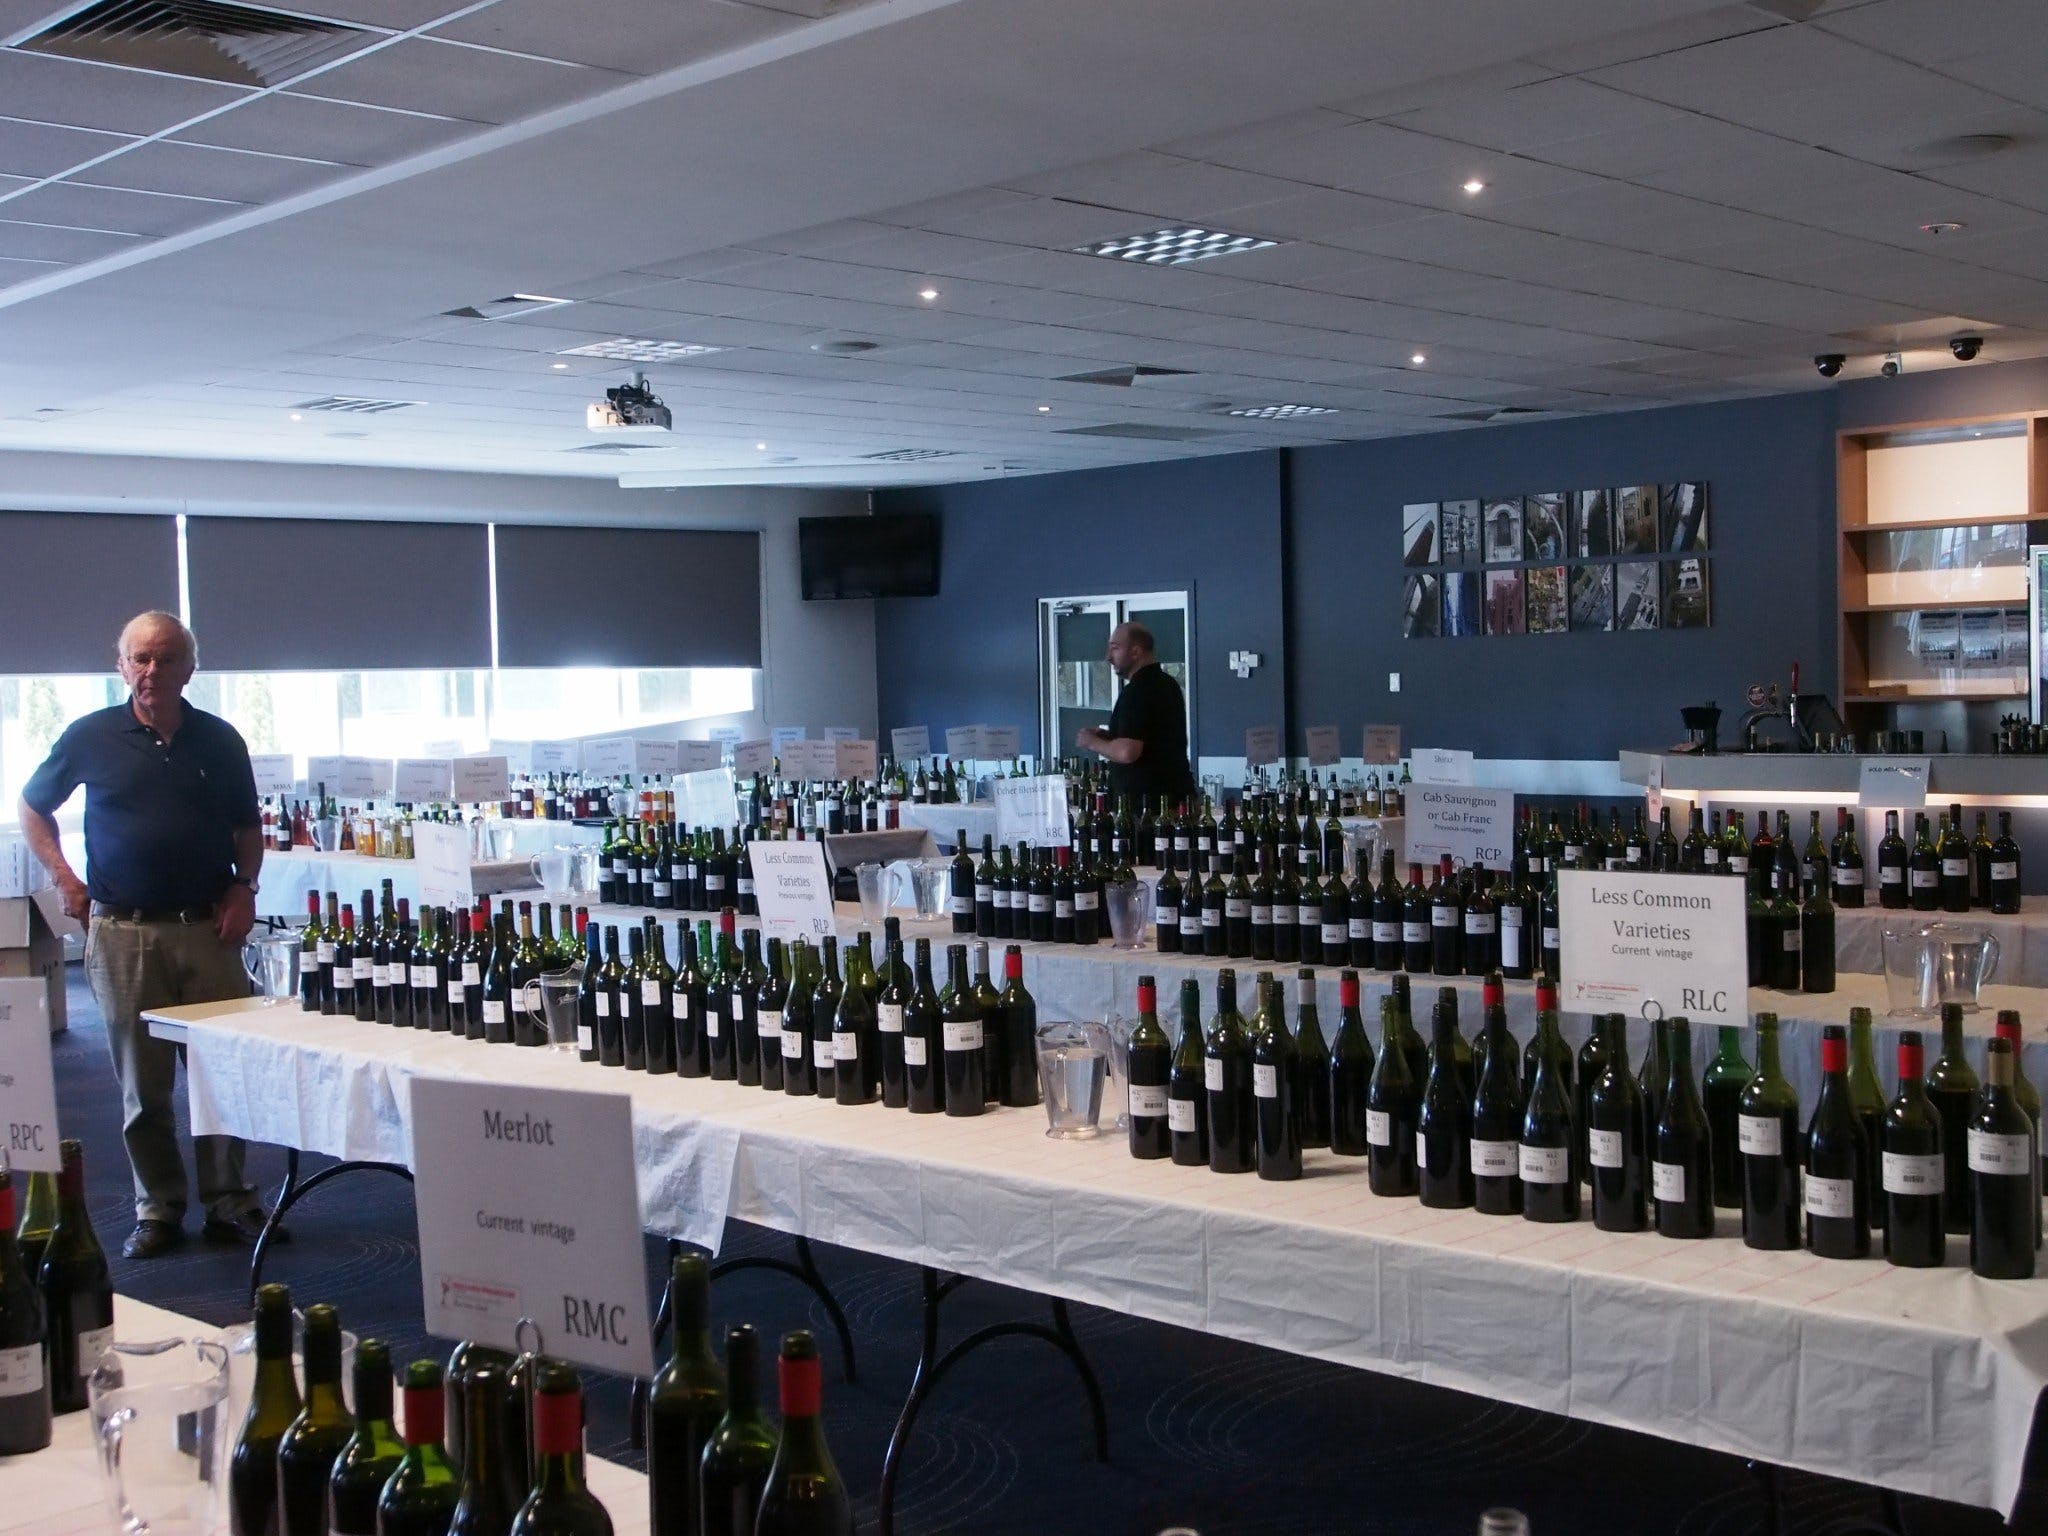 Eltham and District Wine Guild Annual Wine Show - 51st Annual Show - Great Ocean Road Tourism